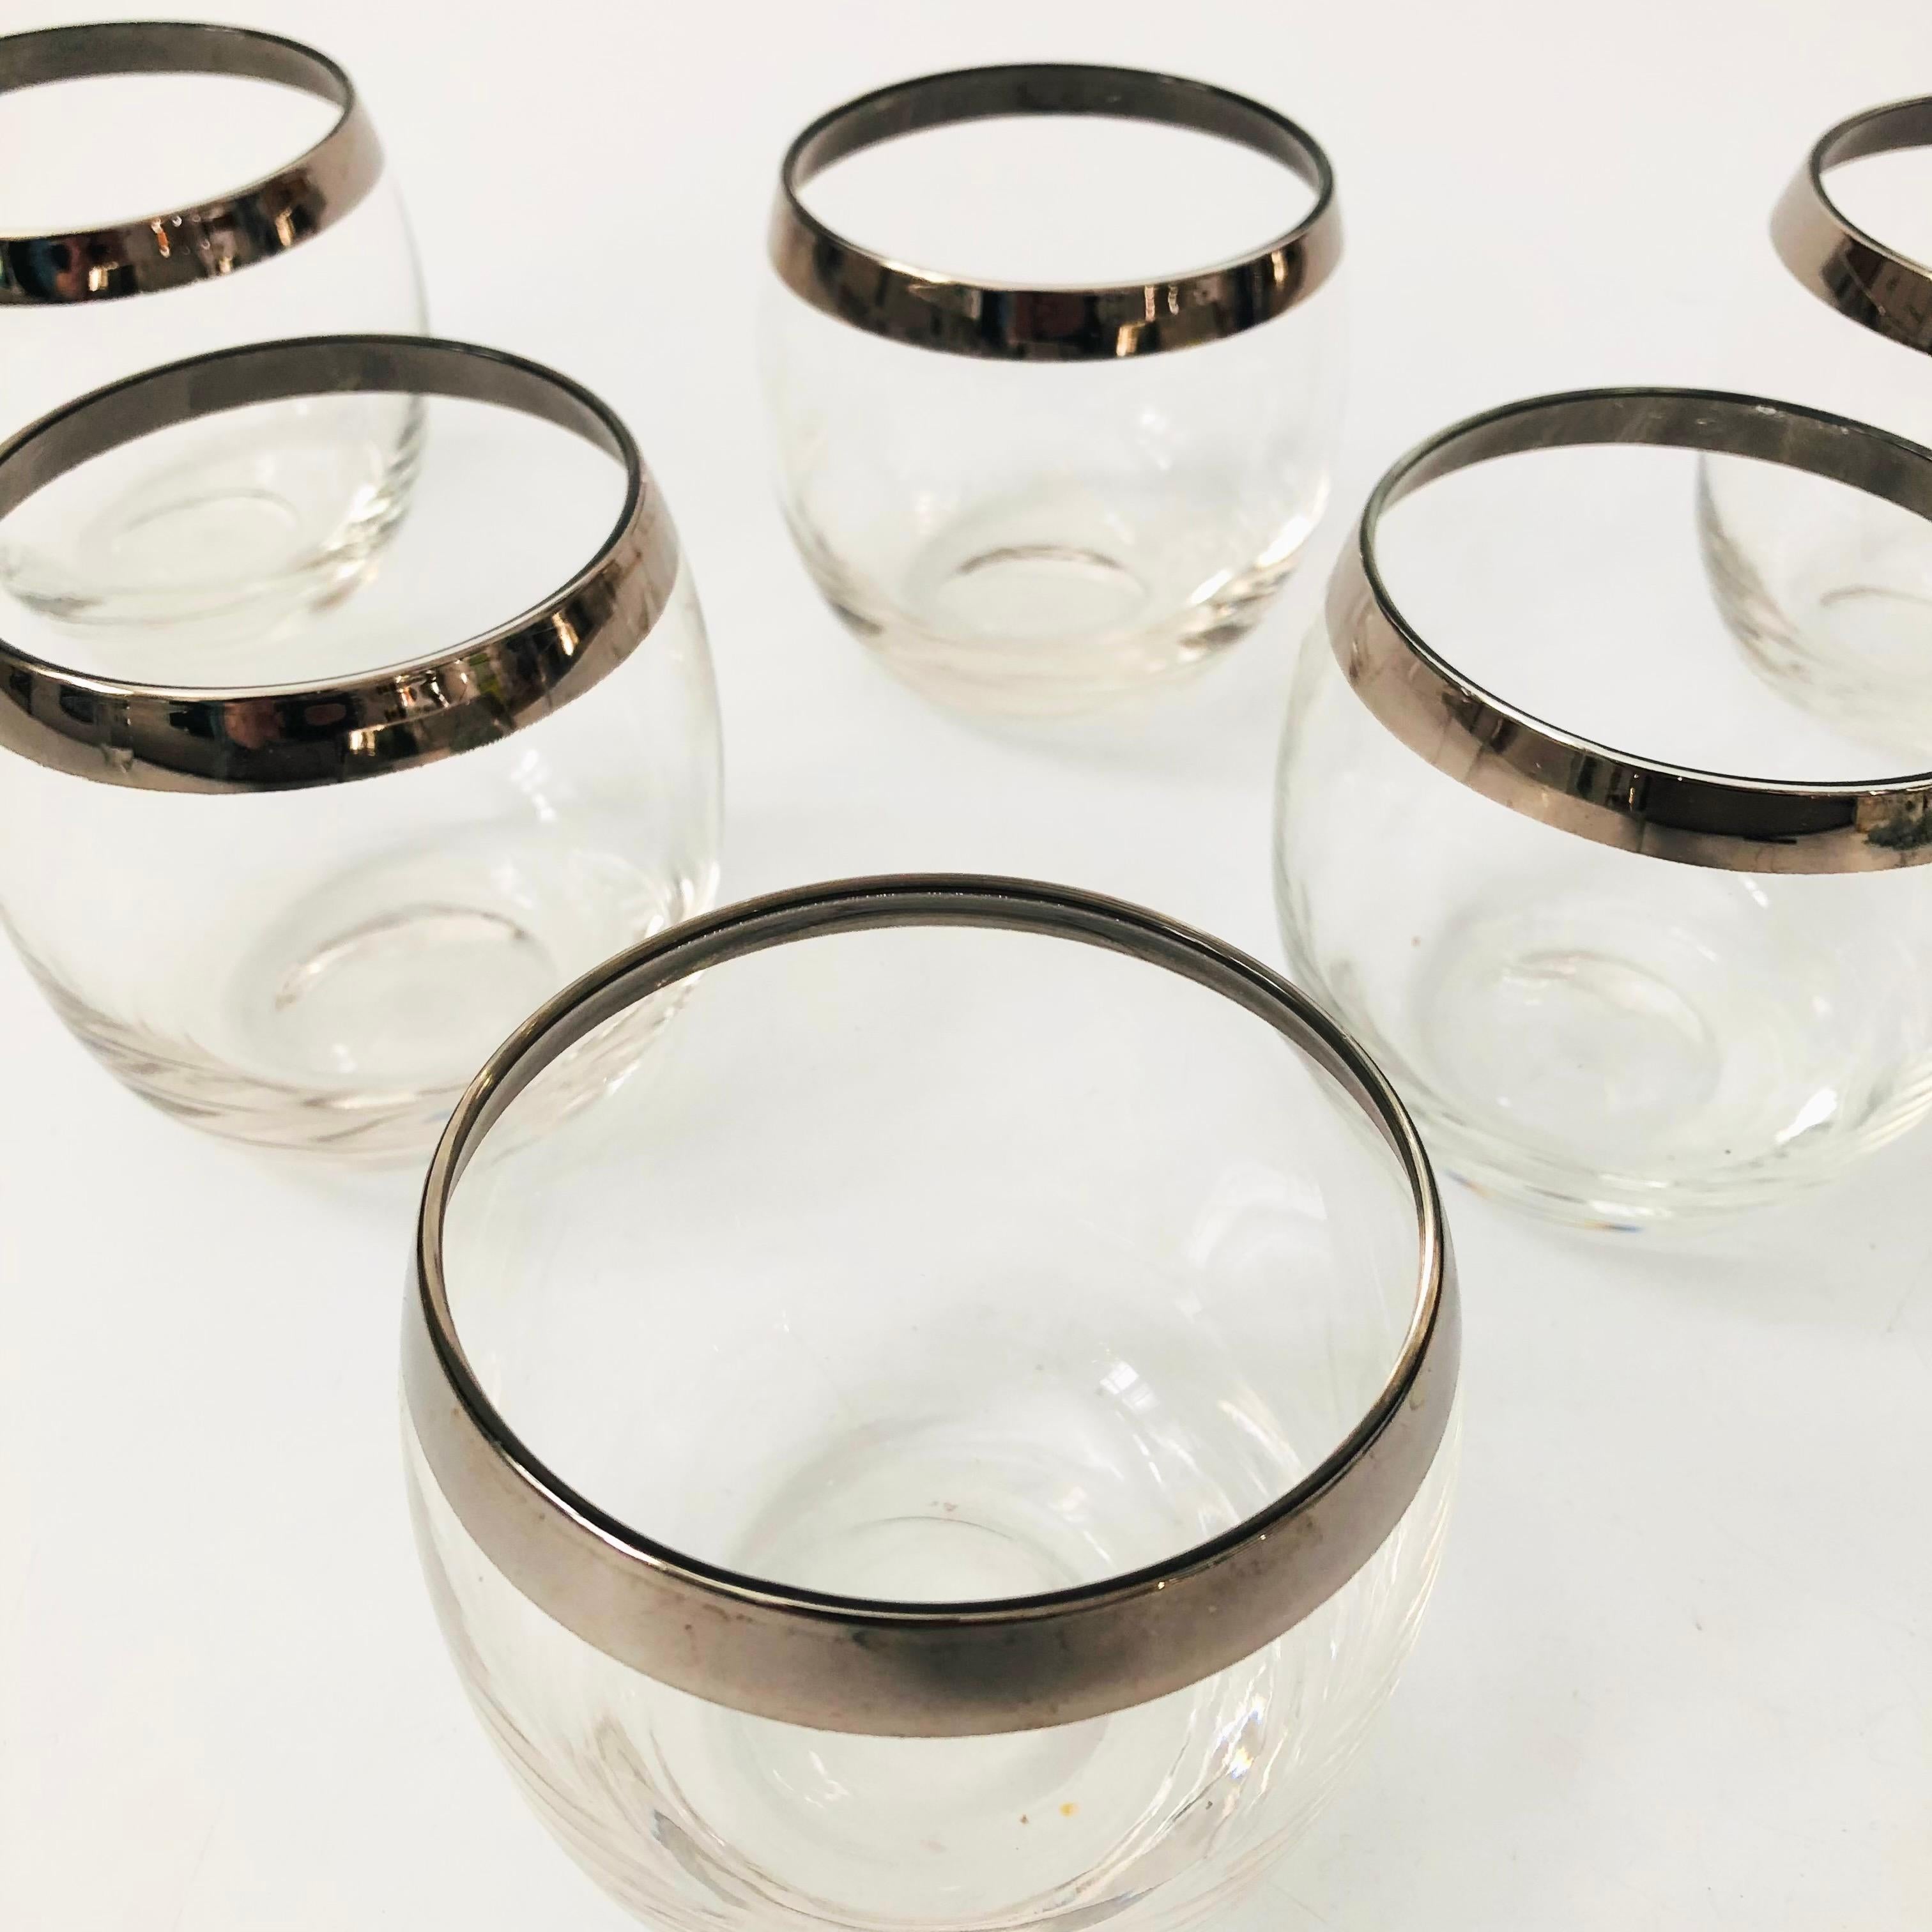 American Mid Century Silver Rim Roly Poly Cocktail Glasses - Set of 6 For Sale